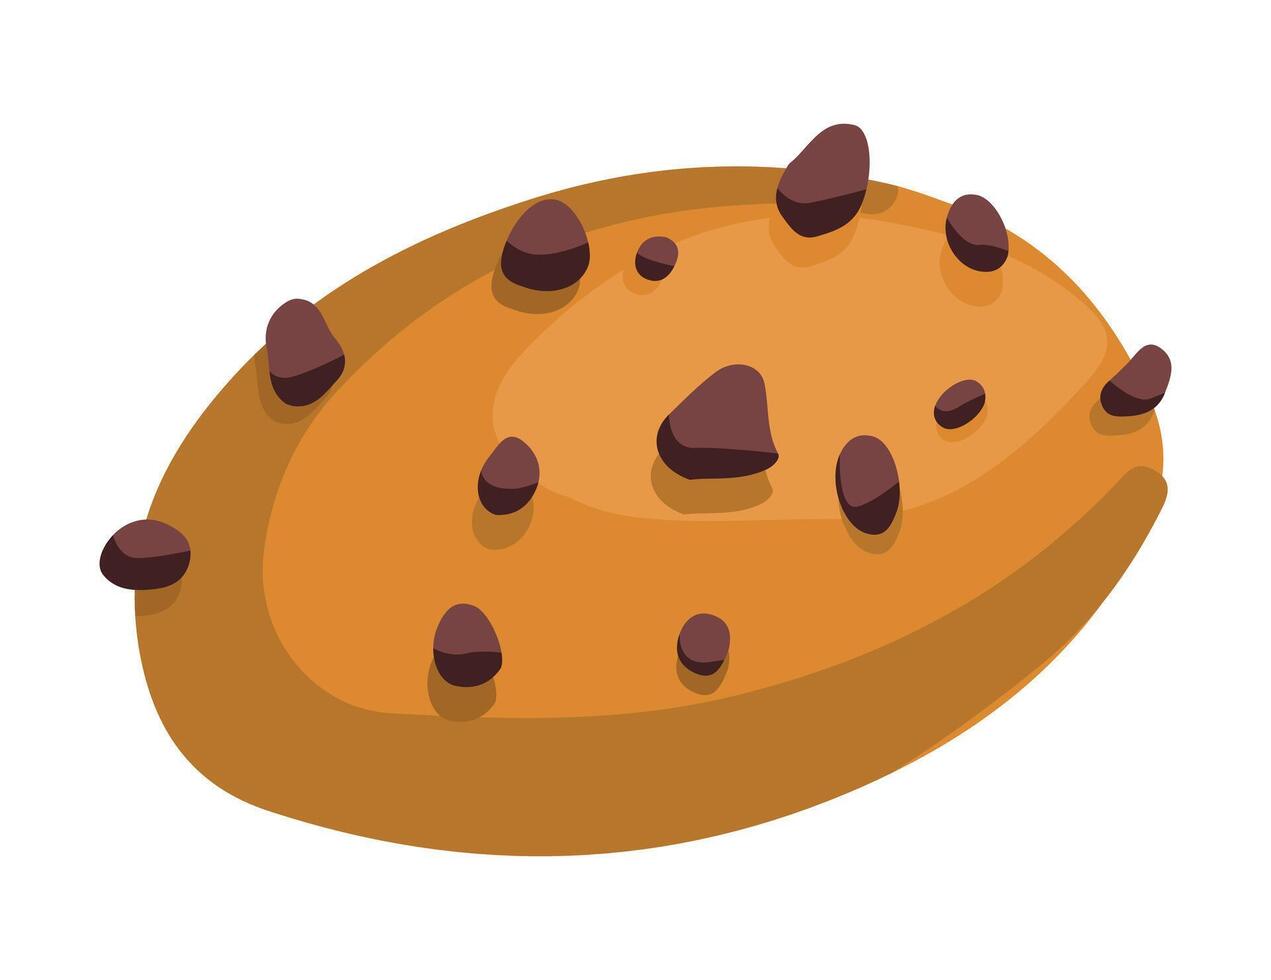 Chocolate chip cookie, dessert. Hand drawn vector illustration in flat style. Single doodle of sweet food. Cartoon clipart isolated on white background.